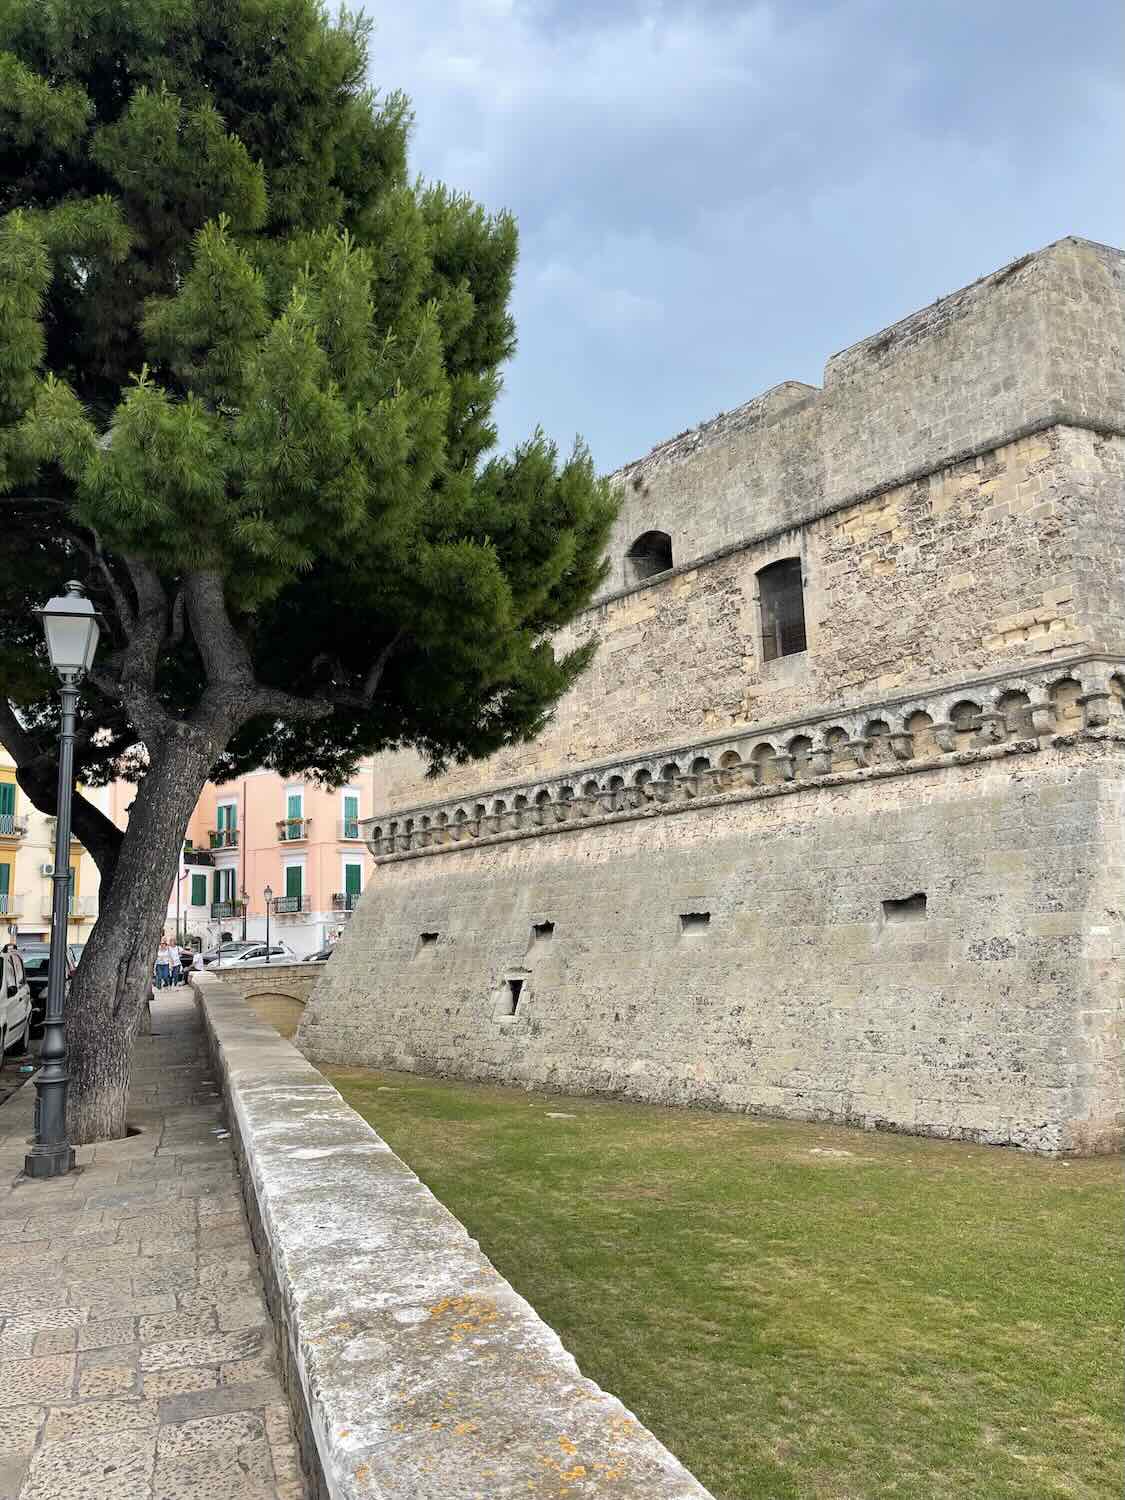 A closer view of Bari Castle, featuring its robust stone walls and architectural details. A tree with dense green foliage grows next to the castle, and colorful buildings are visible in the background.